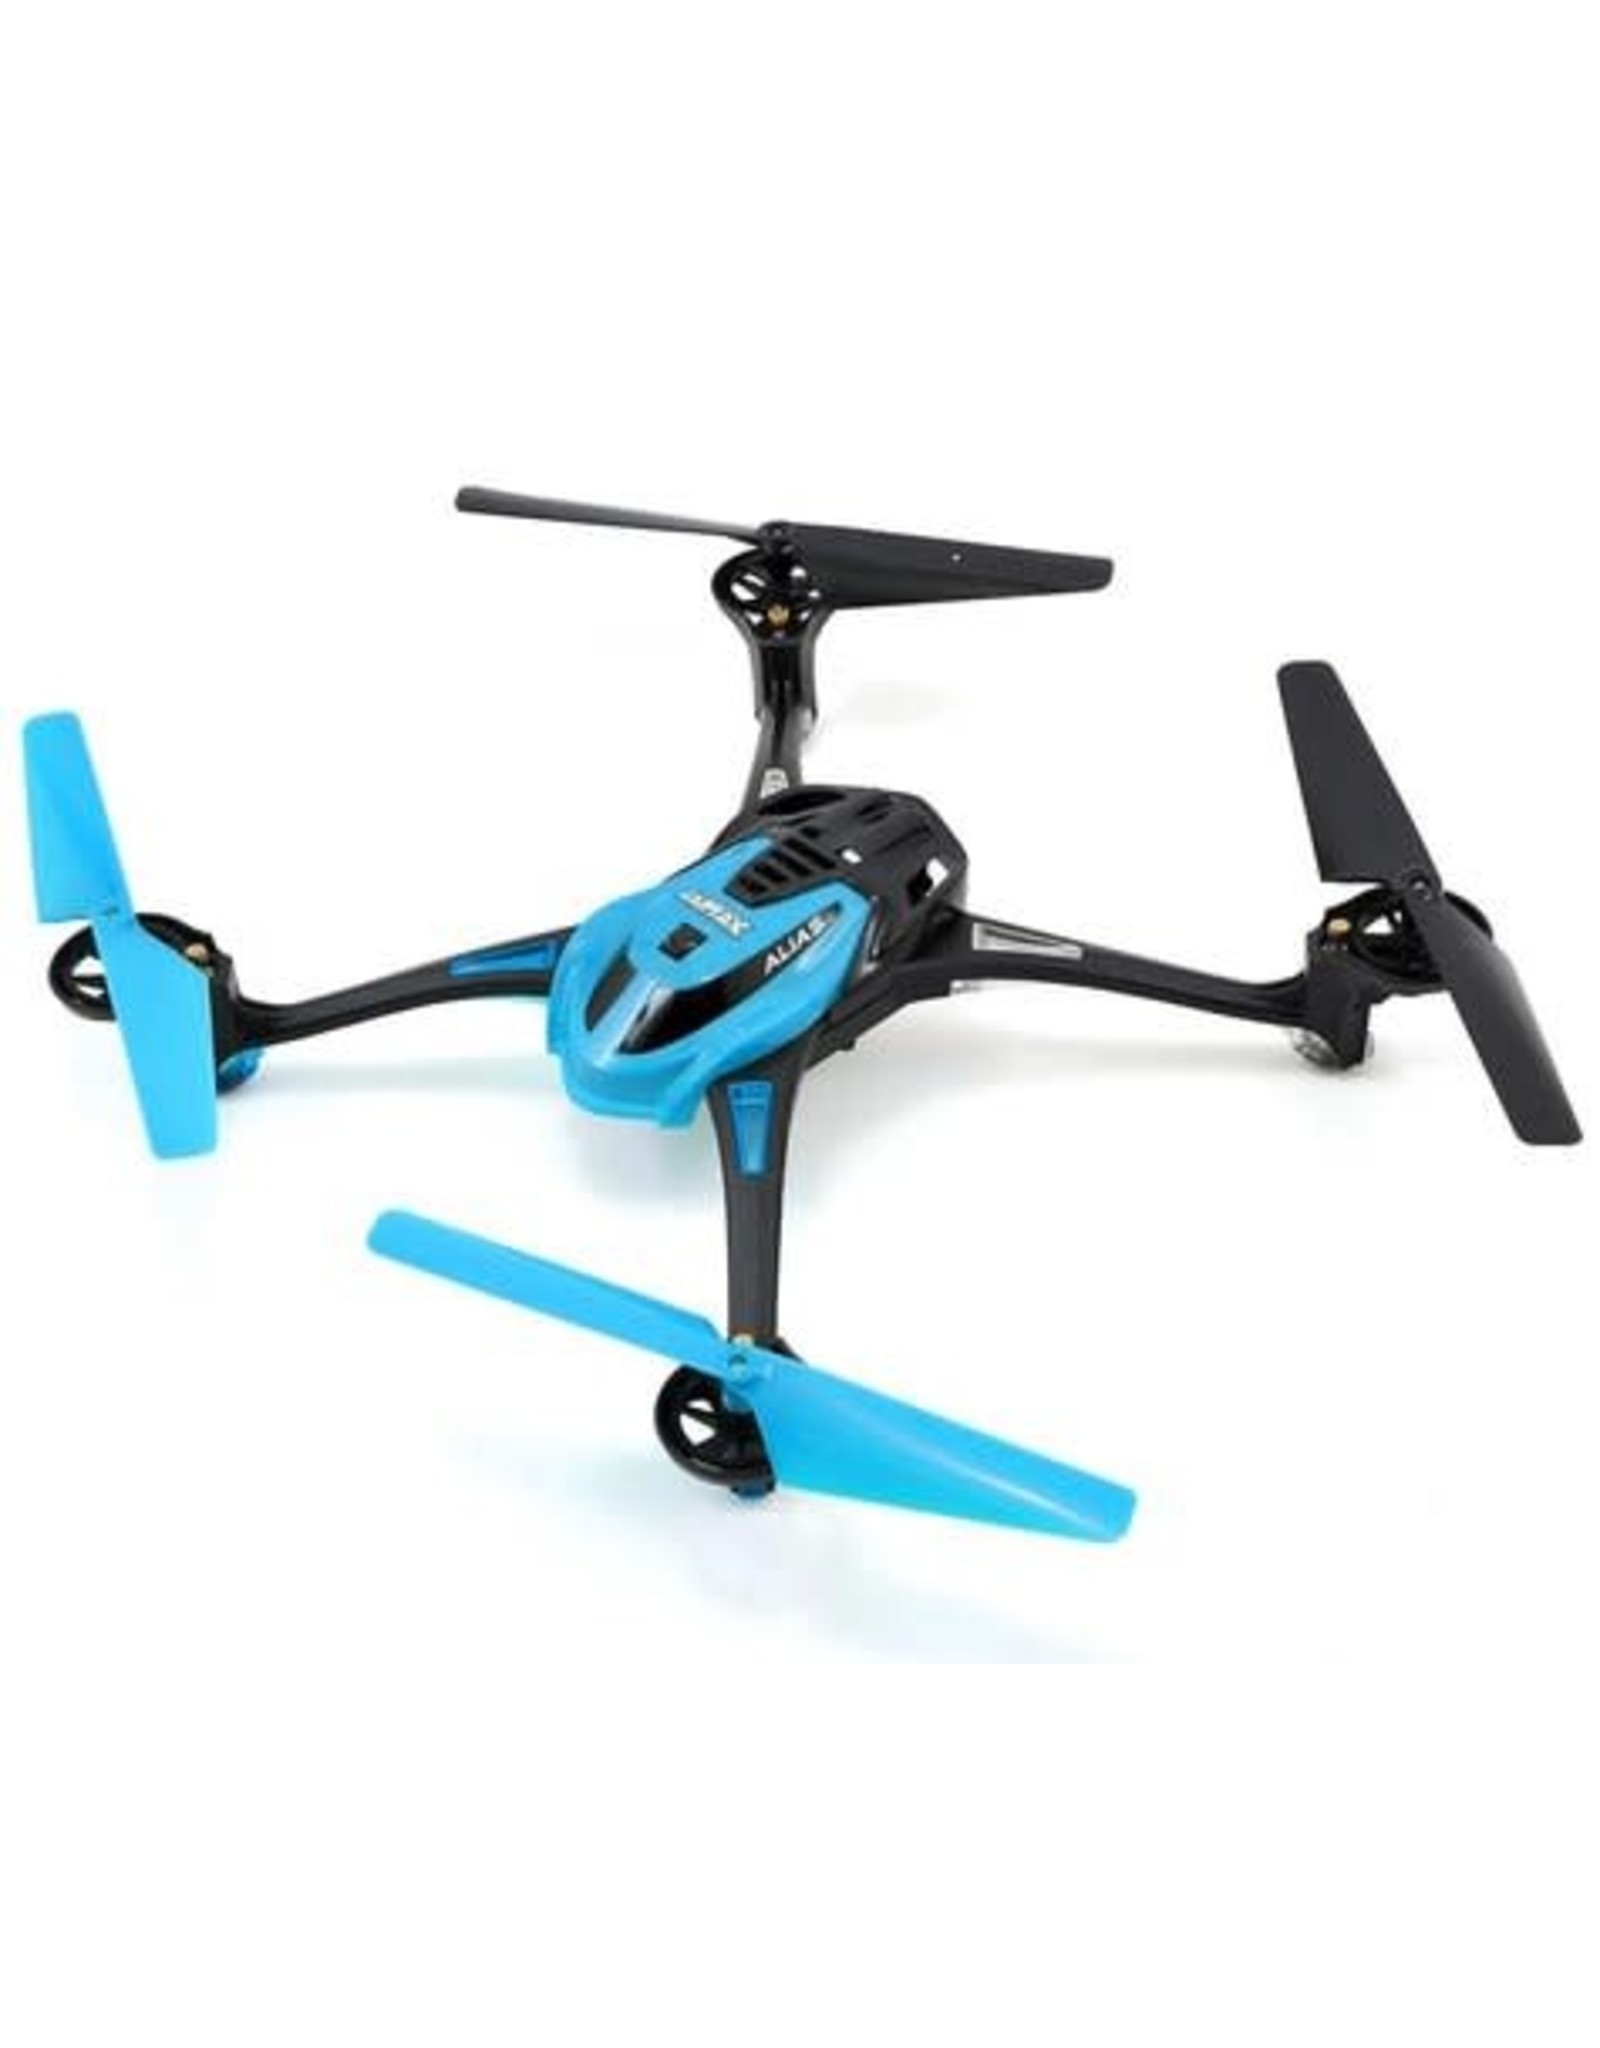 Traxxas Drones > Kits > Sport > Ready to Fly > Part# TRA6608-BLUE Traxxas LaTrax Alias Ready-To-Fly Micro Electric Quadcopter Drone (Blue)